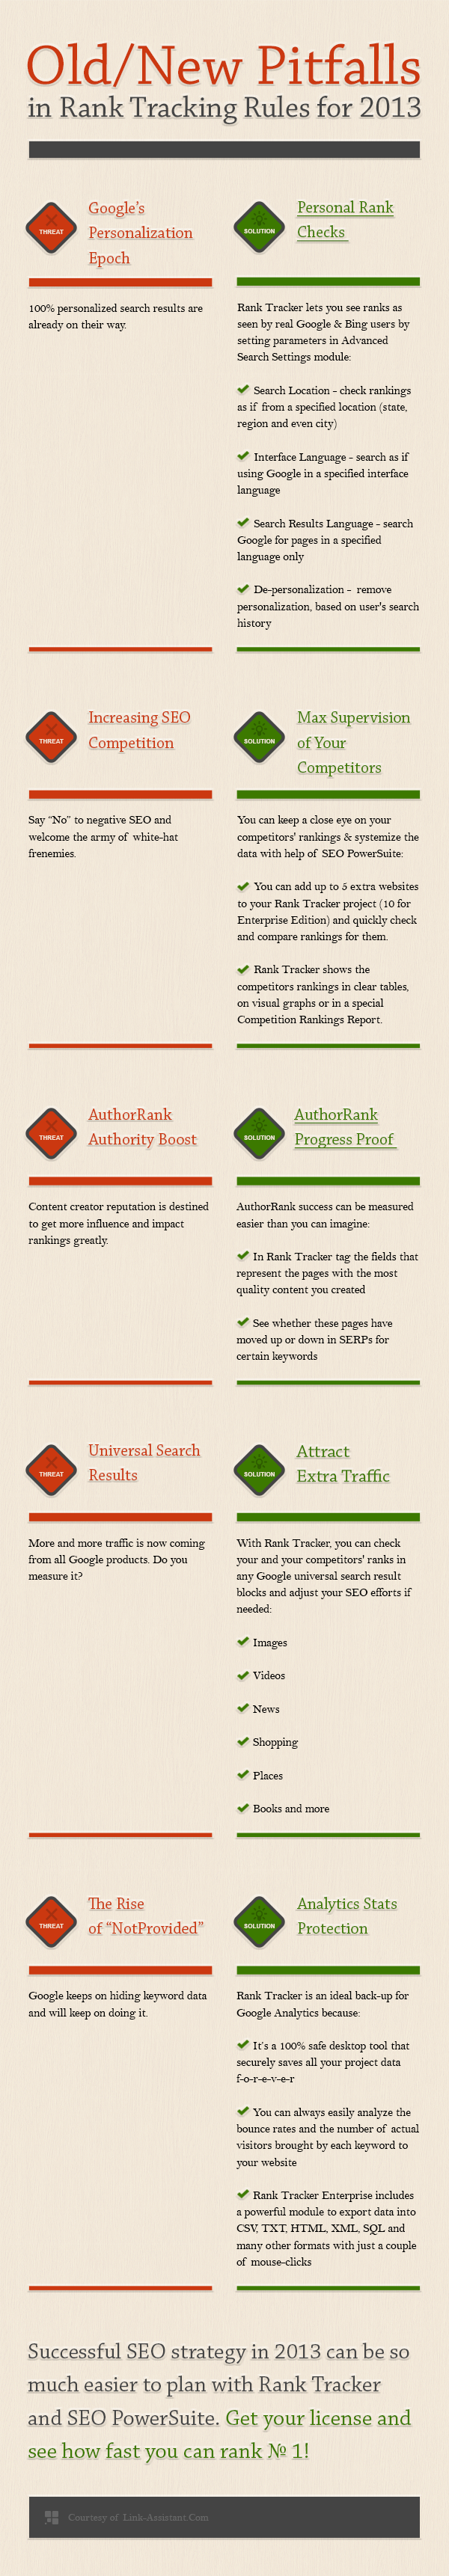 Seo Rank Tracking Trends 2013